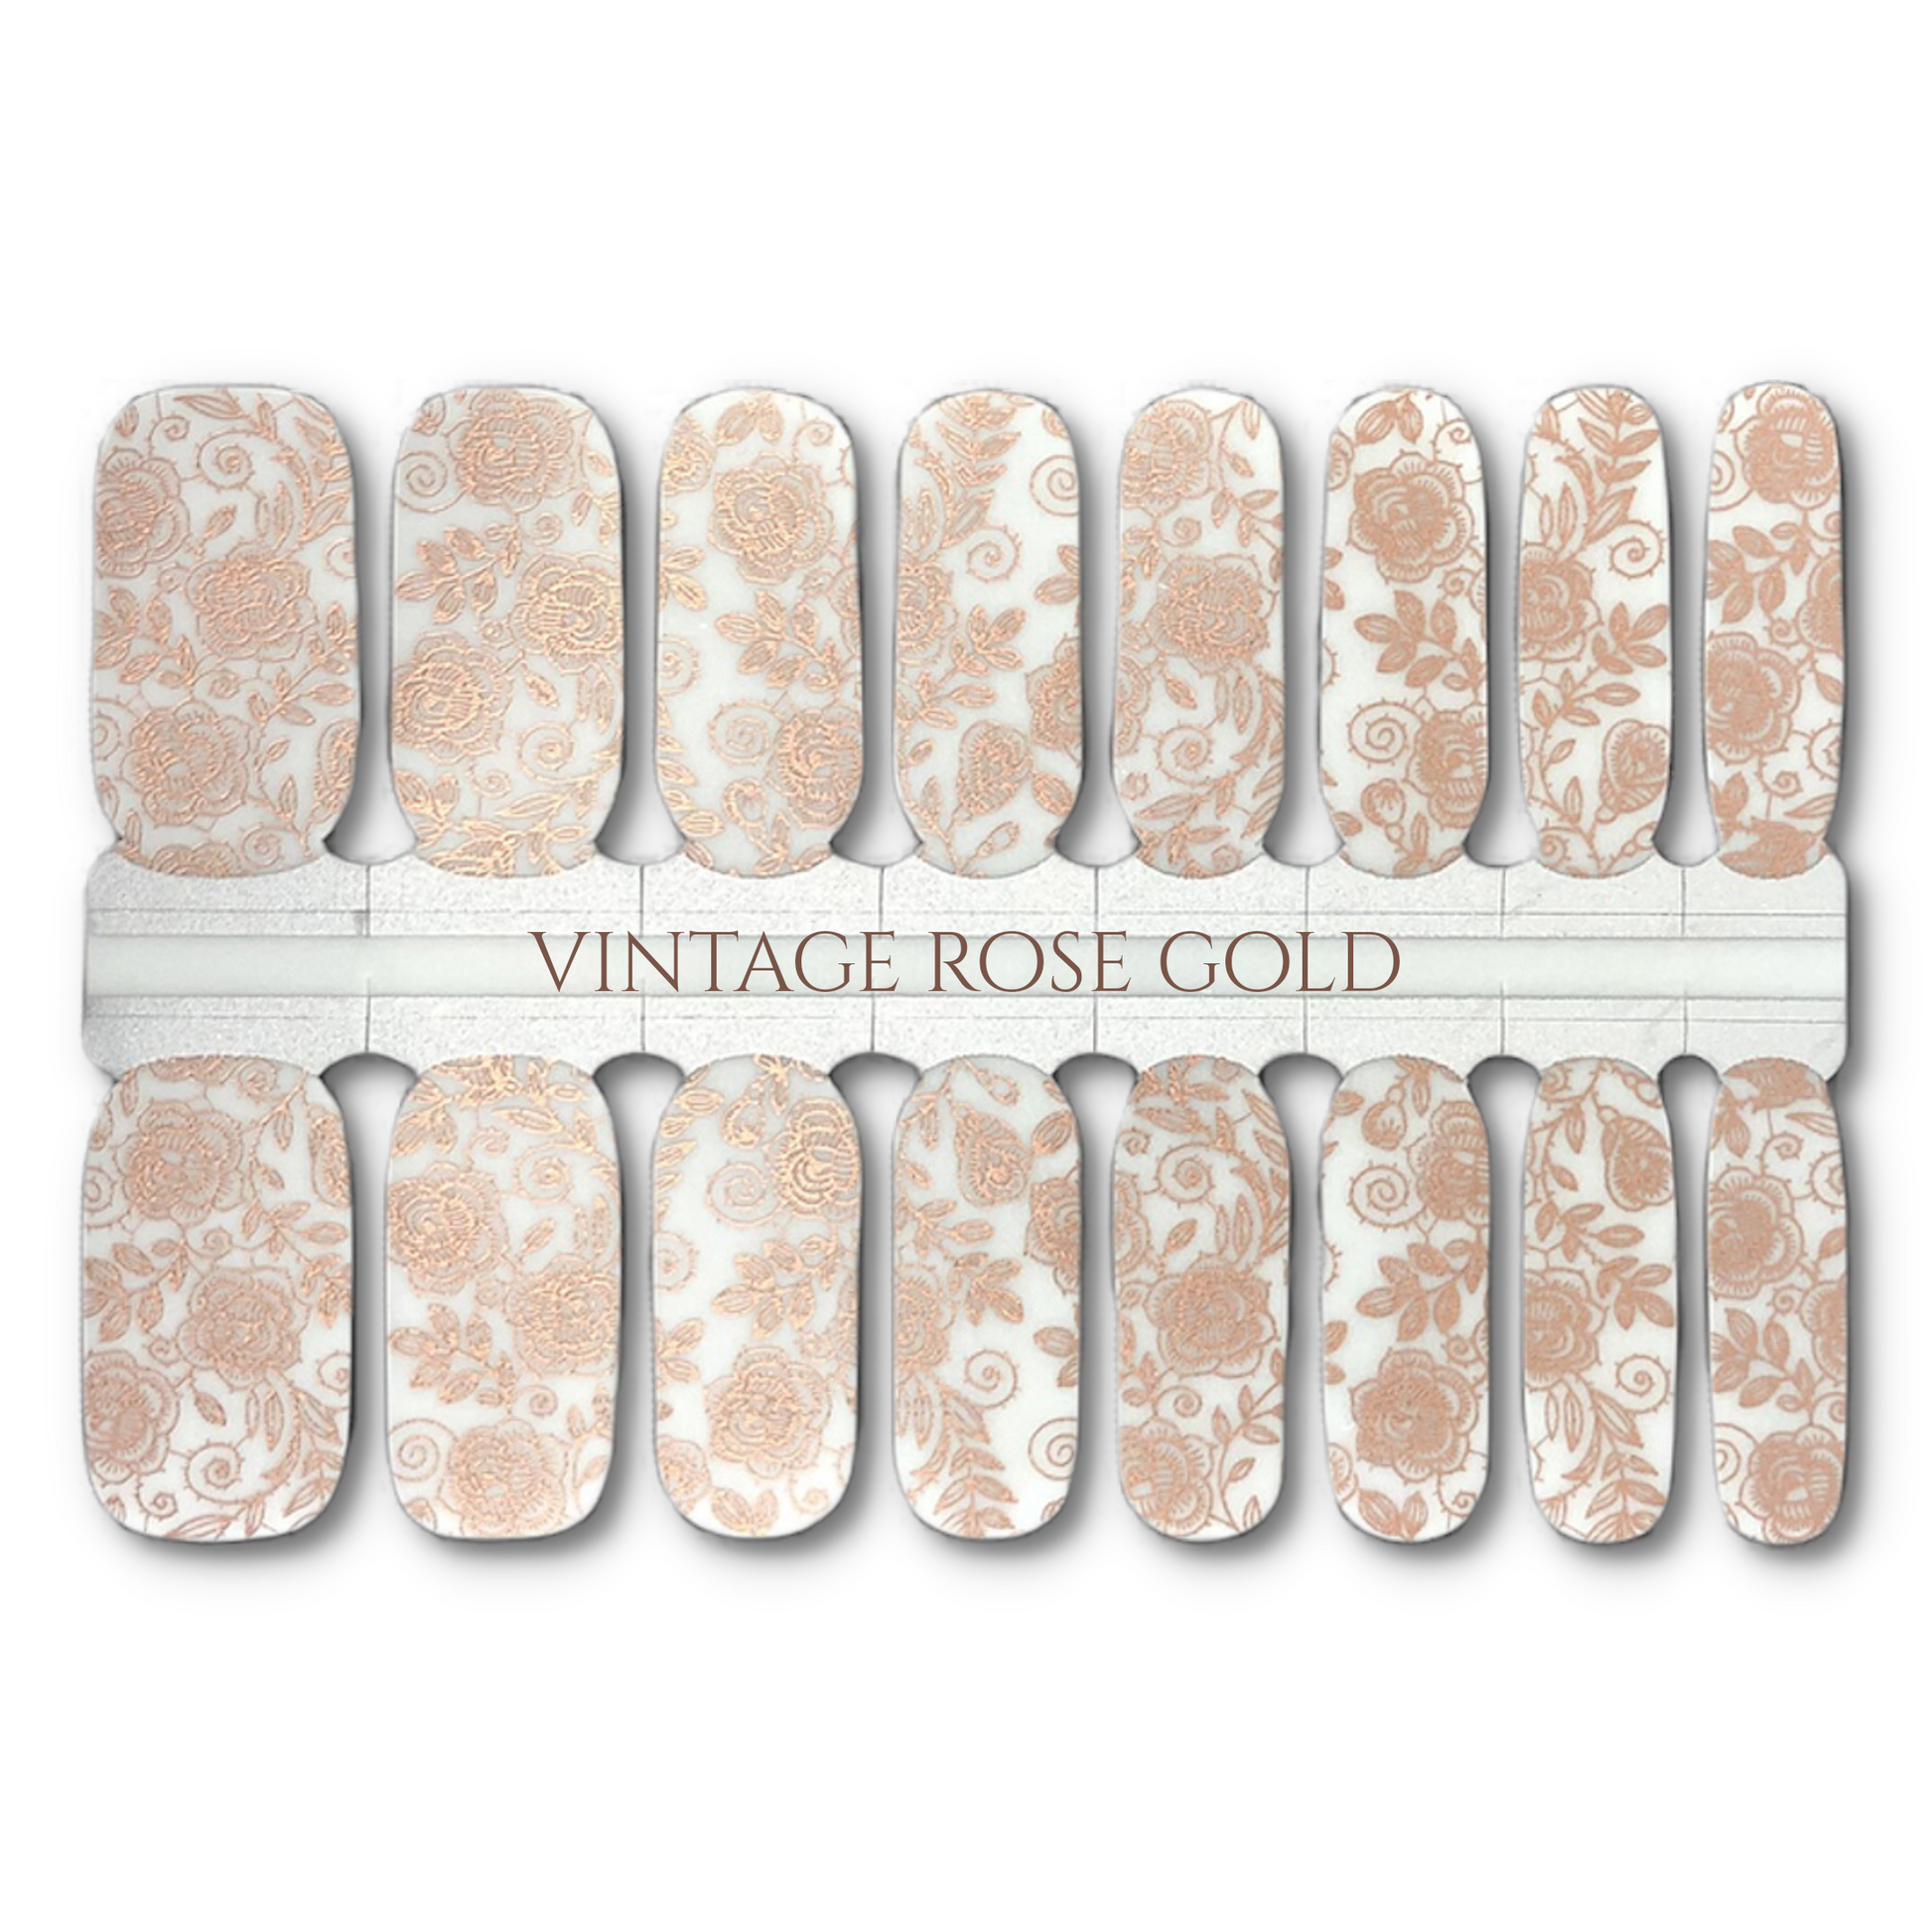 16 Real nail polish strips also called nail wraps or nail stickers. Transparent with a vintage floral design in rose gold.